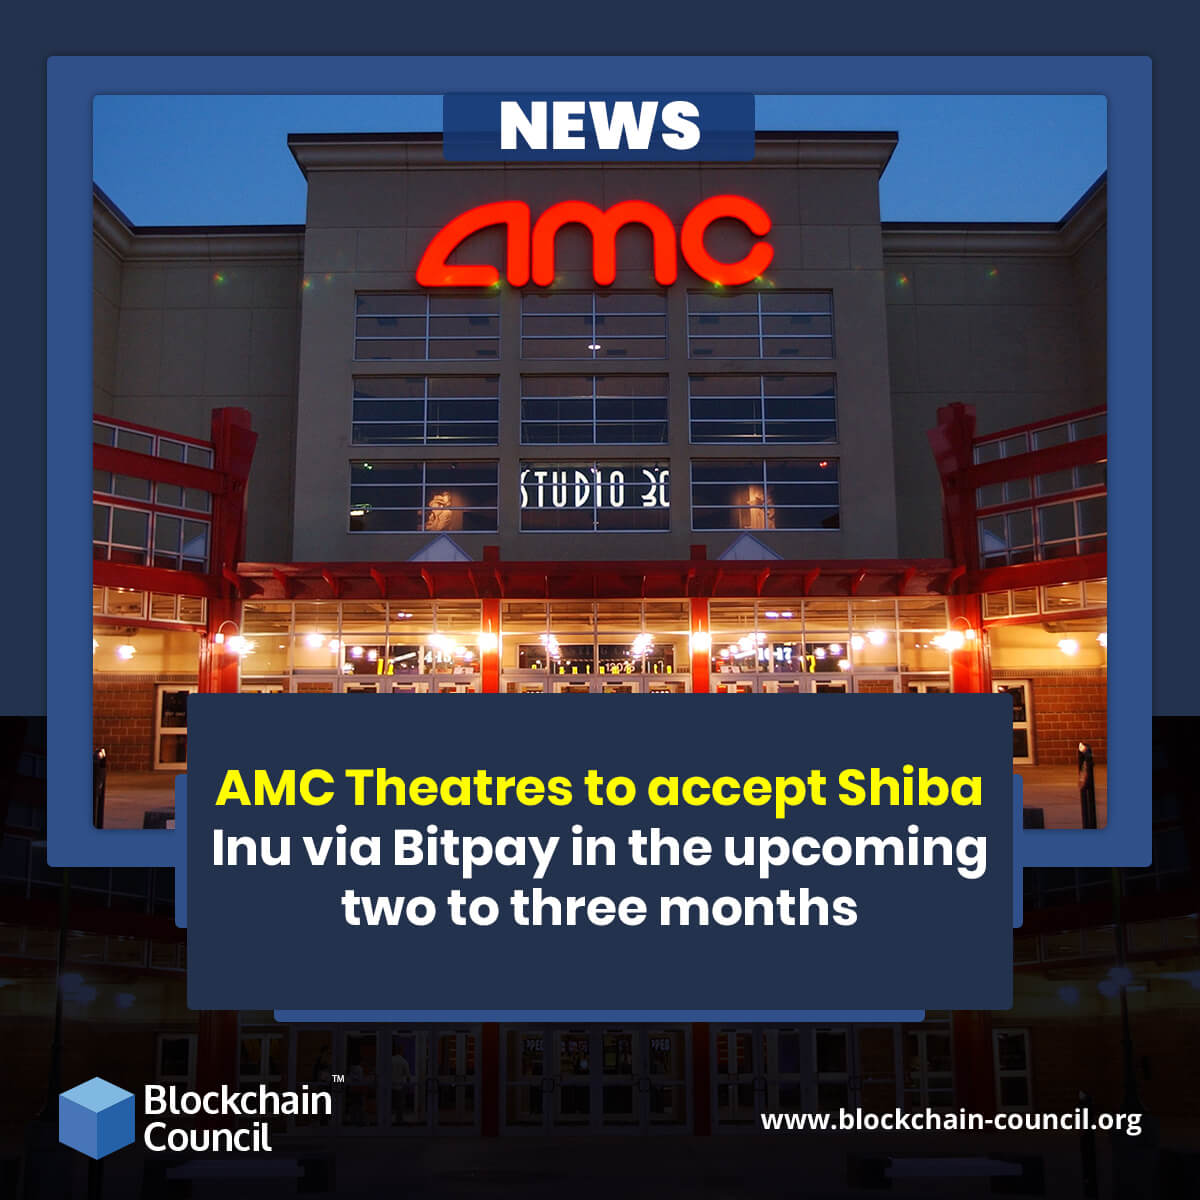 AMC Theatres to accept Shiba Inu via Bitpay in the upcoming two to three months